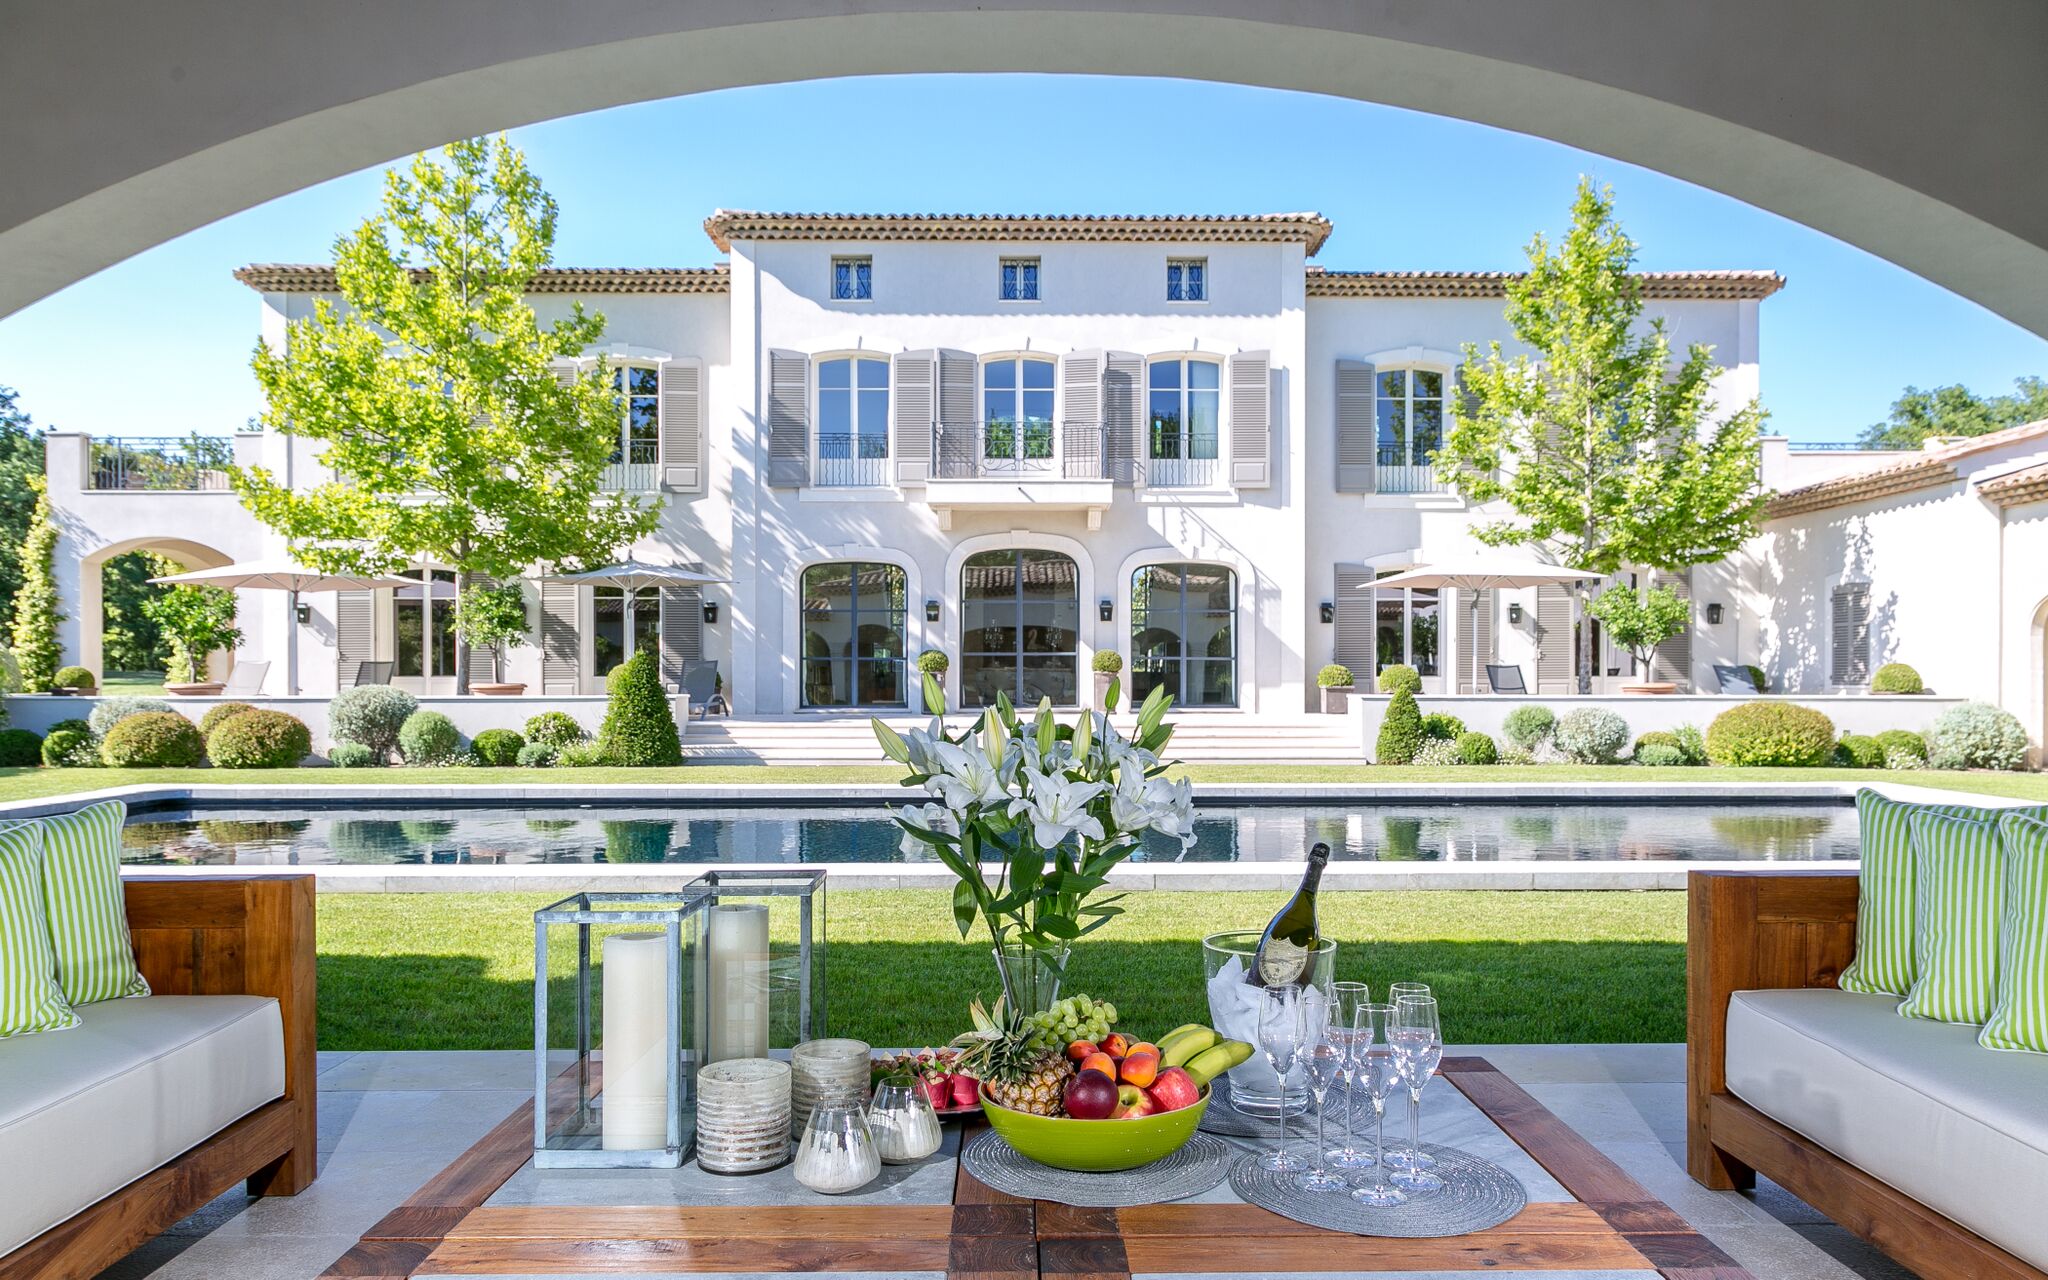 Best of: Luxury Villas in the Country